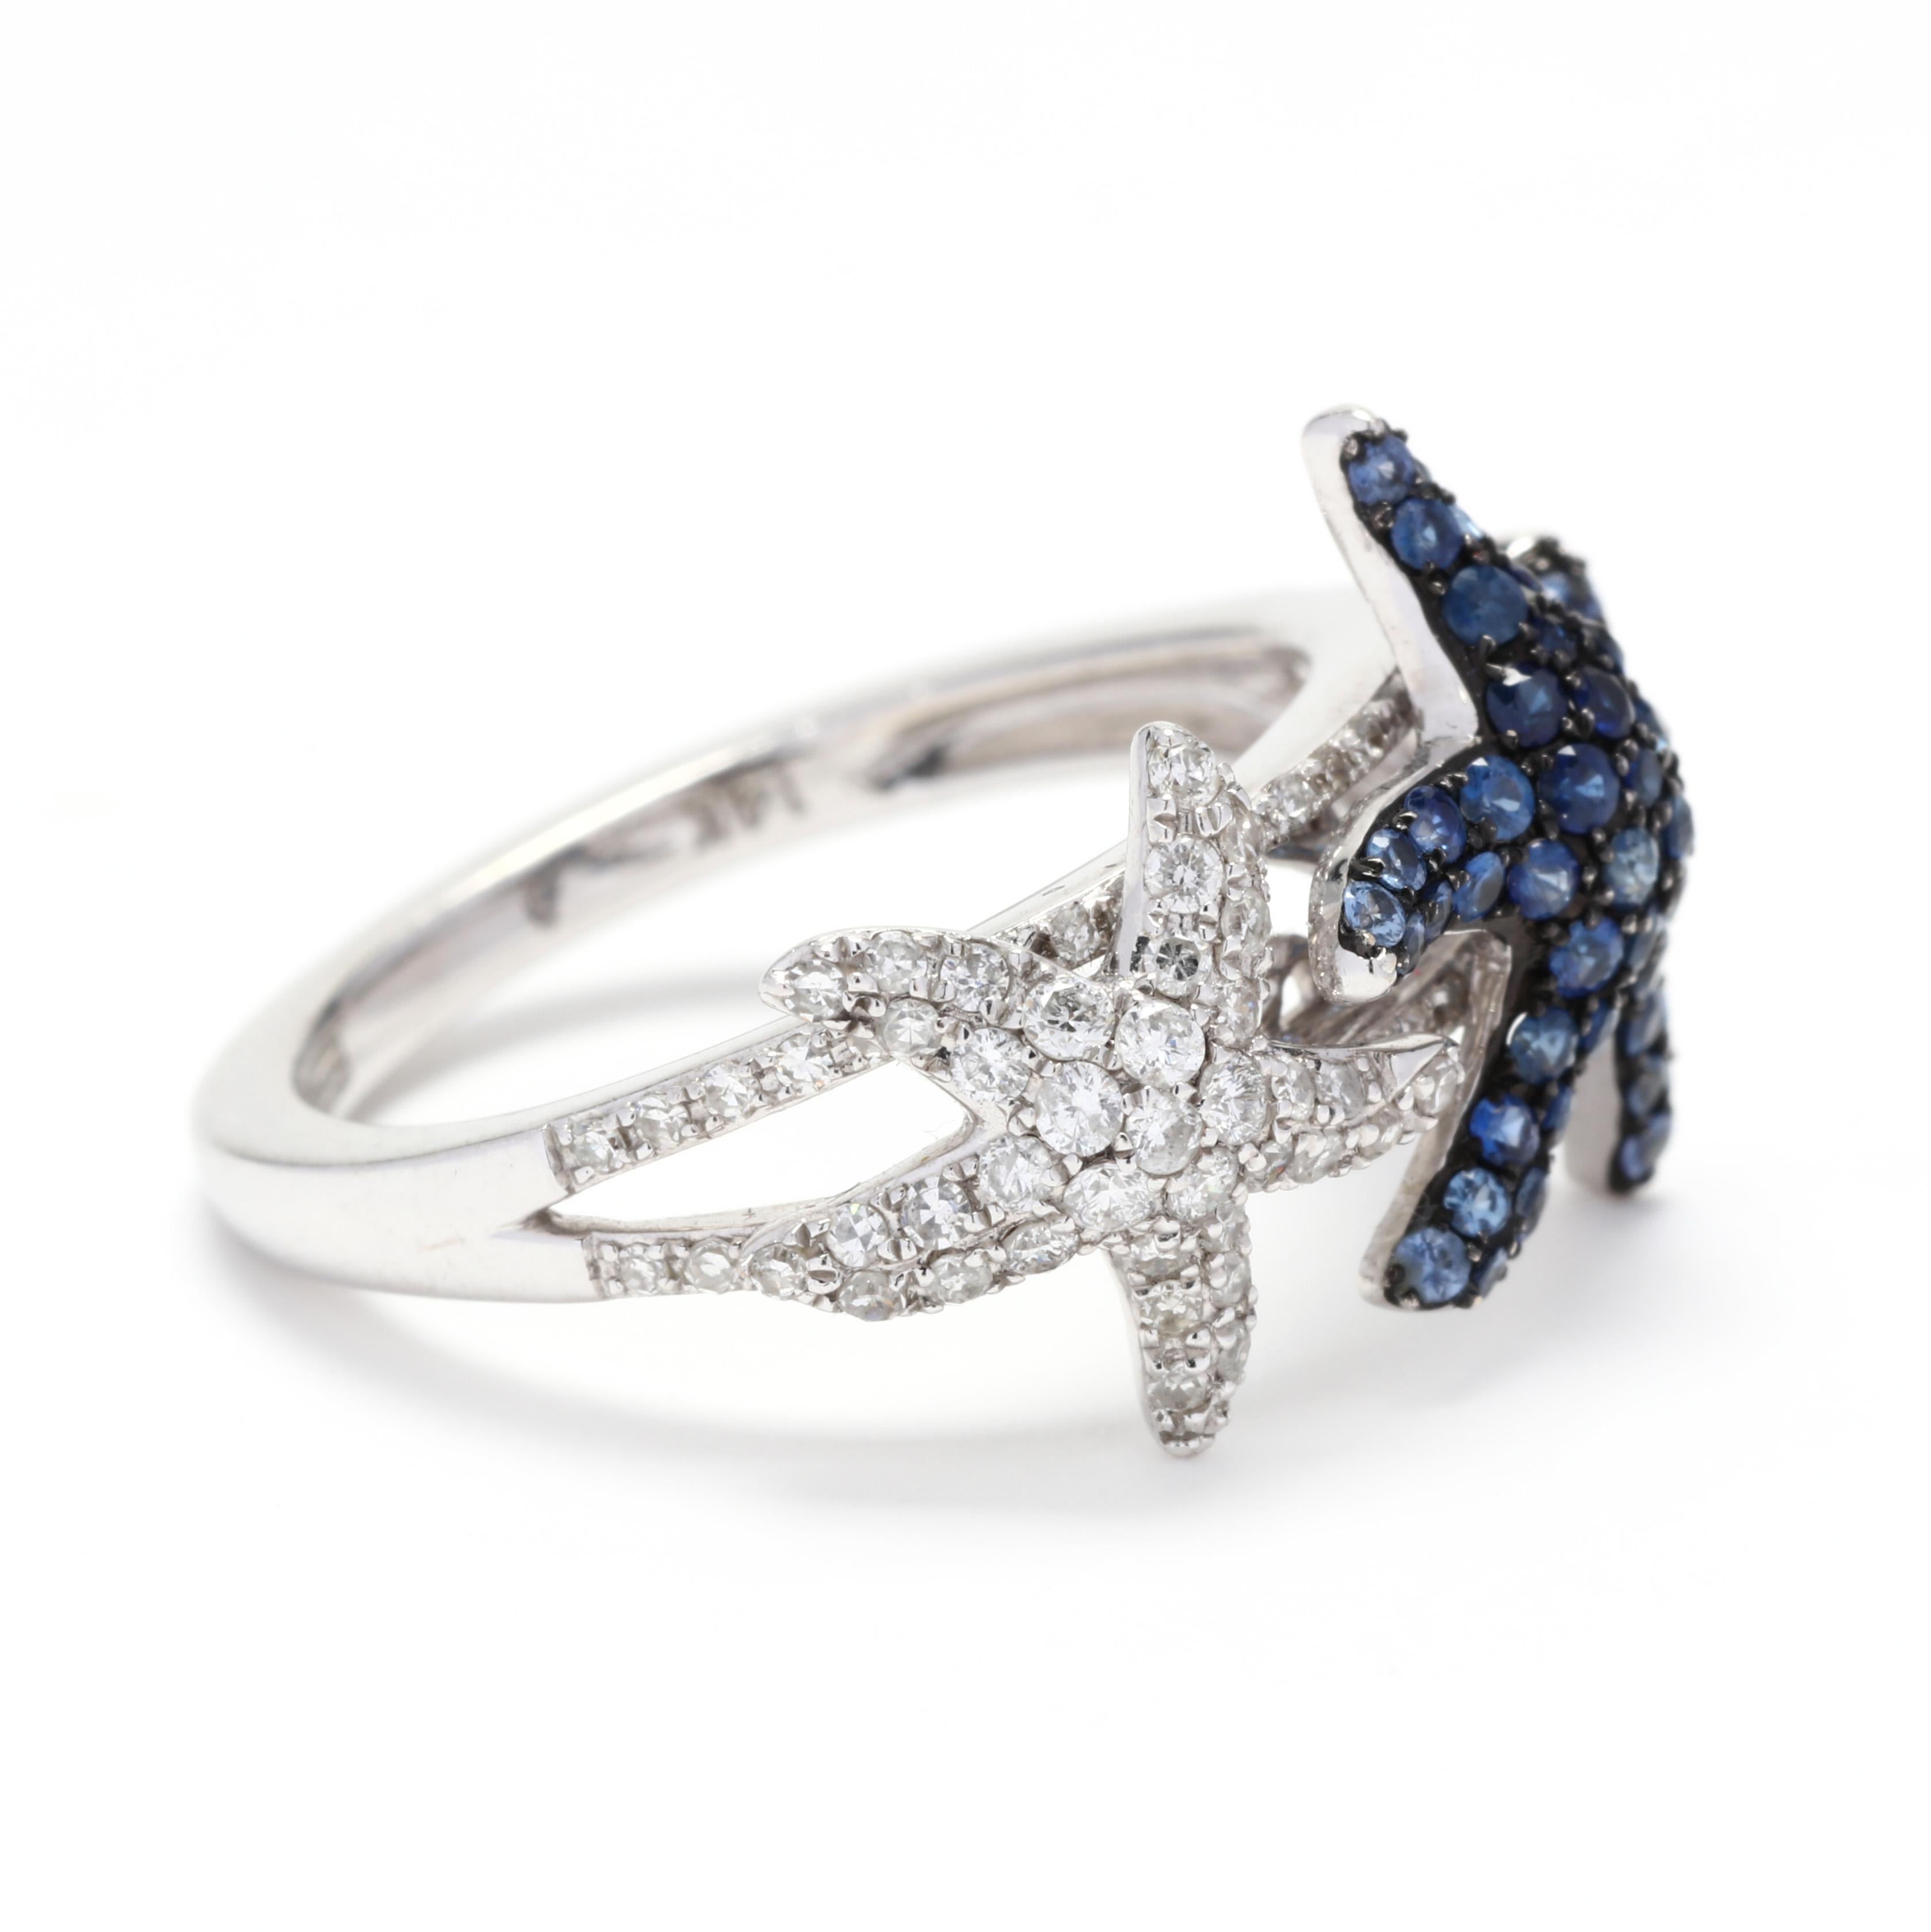 Effy 14k white gold, diamond & sapphire starfish ring. A cute ring with two starfish set next to each other. The larger one is set with sapphires and the smaller with diamonds. A great ring for any stack!

Stones:
- sapphires
- round cut
- 1.3 - 1.5